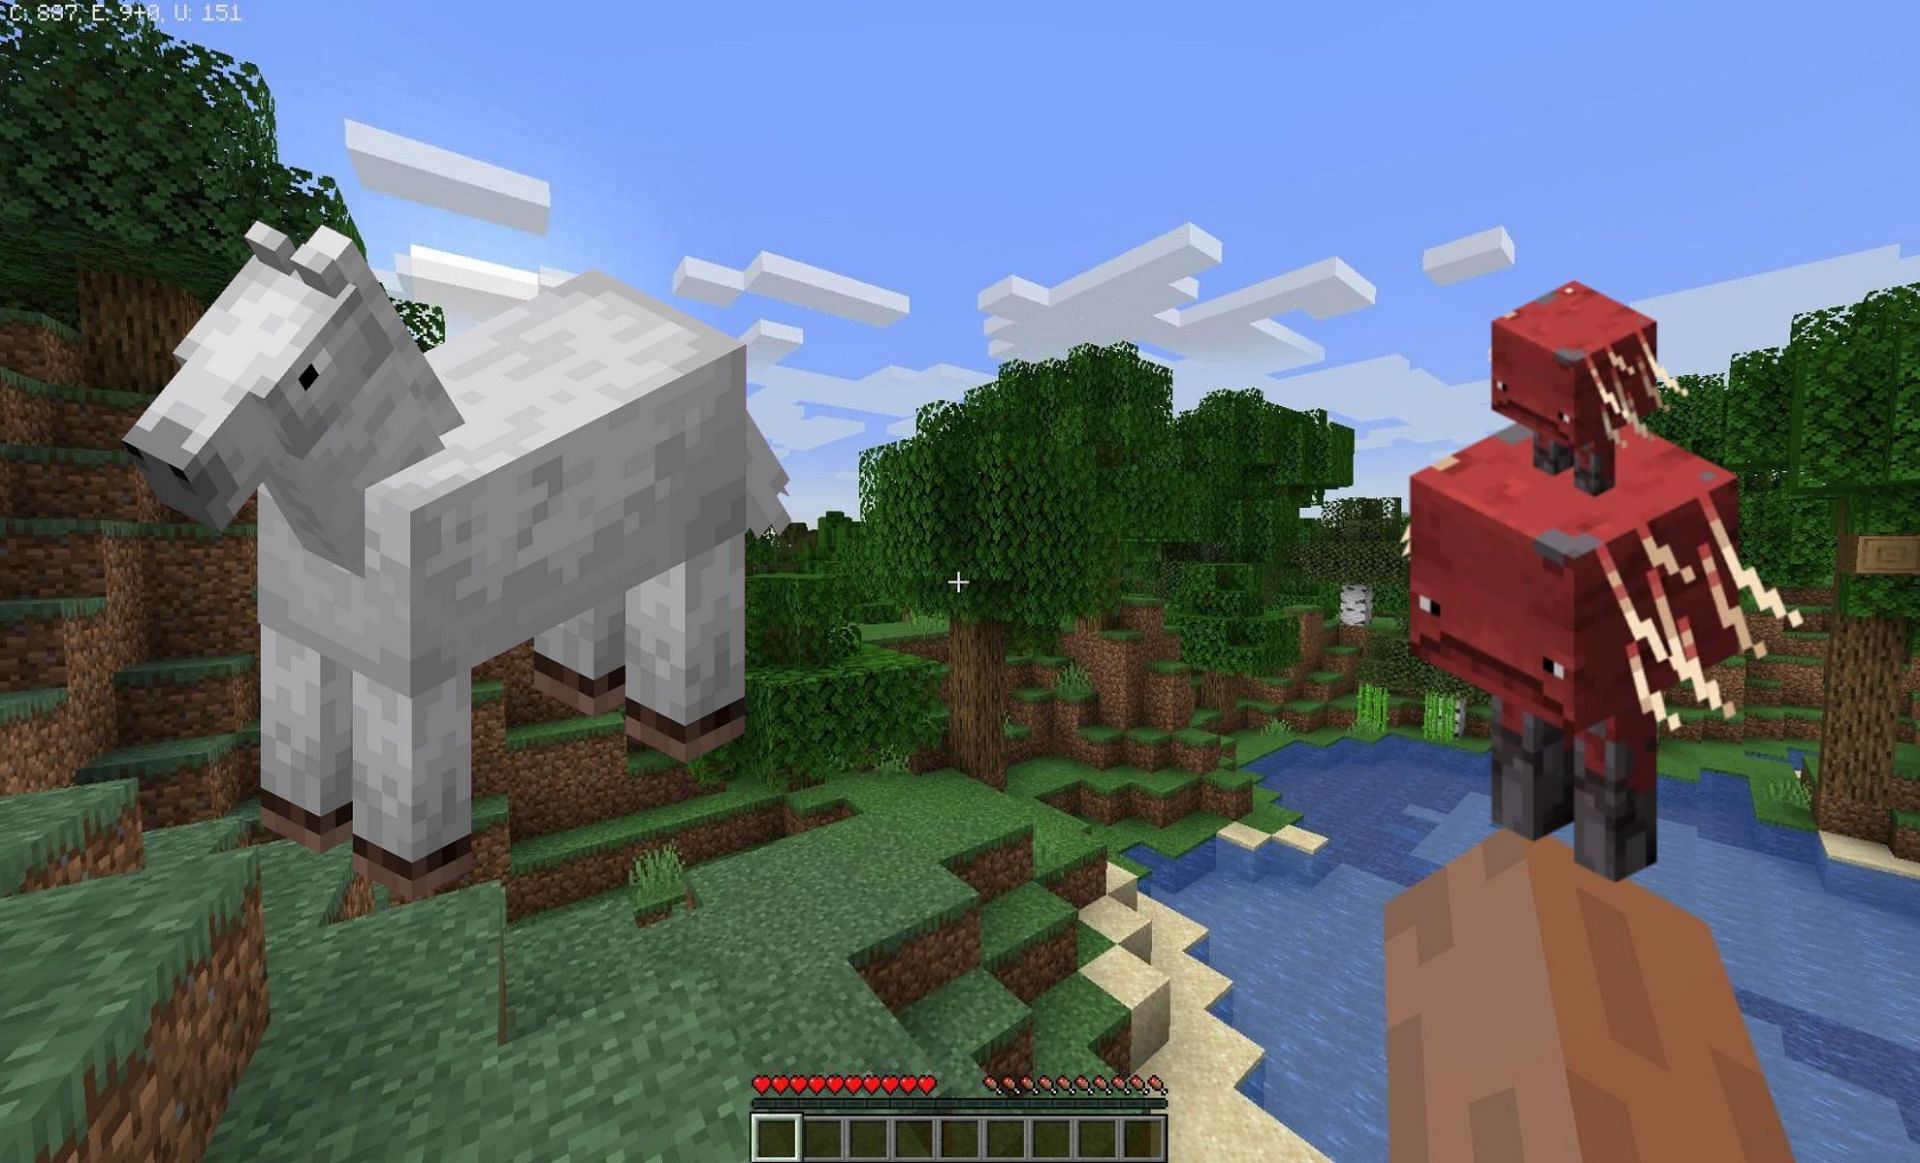 Rideable mobs (Images via Minecraft Wiki)